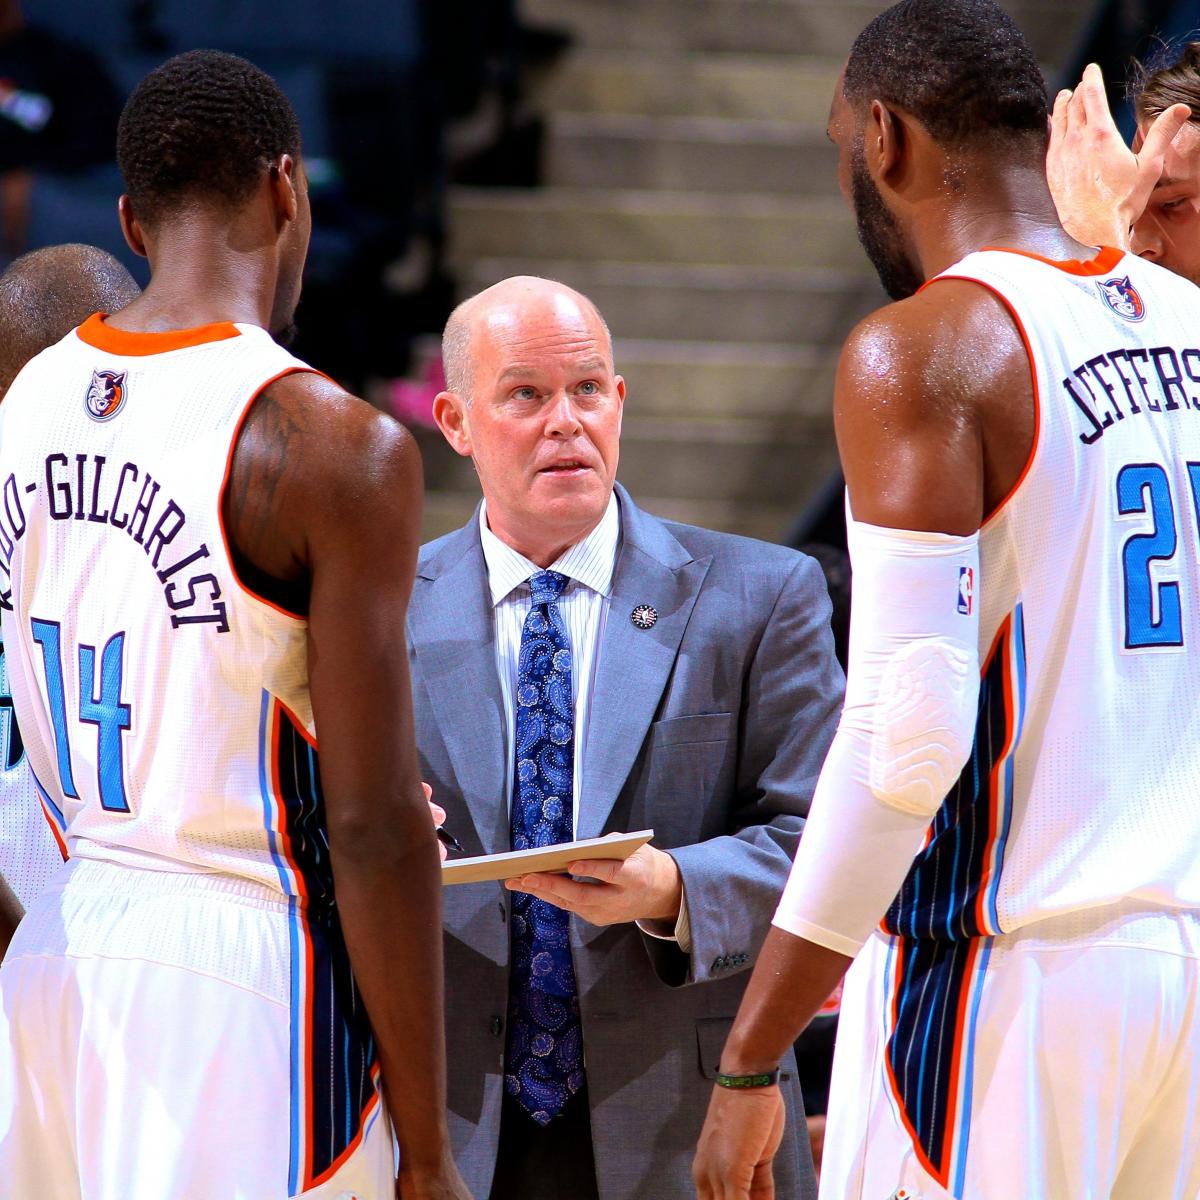 Oklahoma's greatest basketball player, Mark Price, returns to OKC as  Bobcats' assistant coach